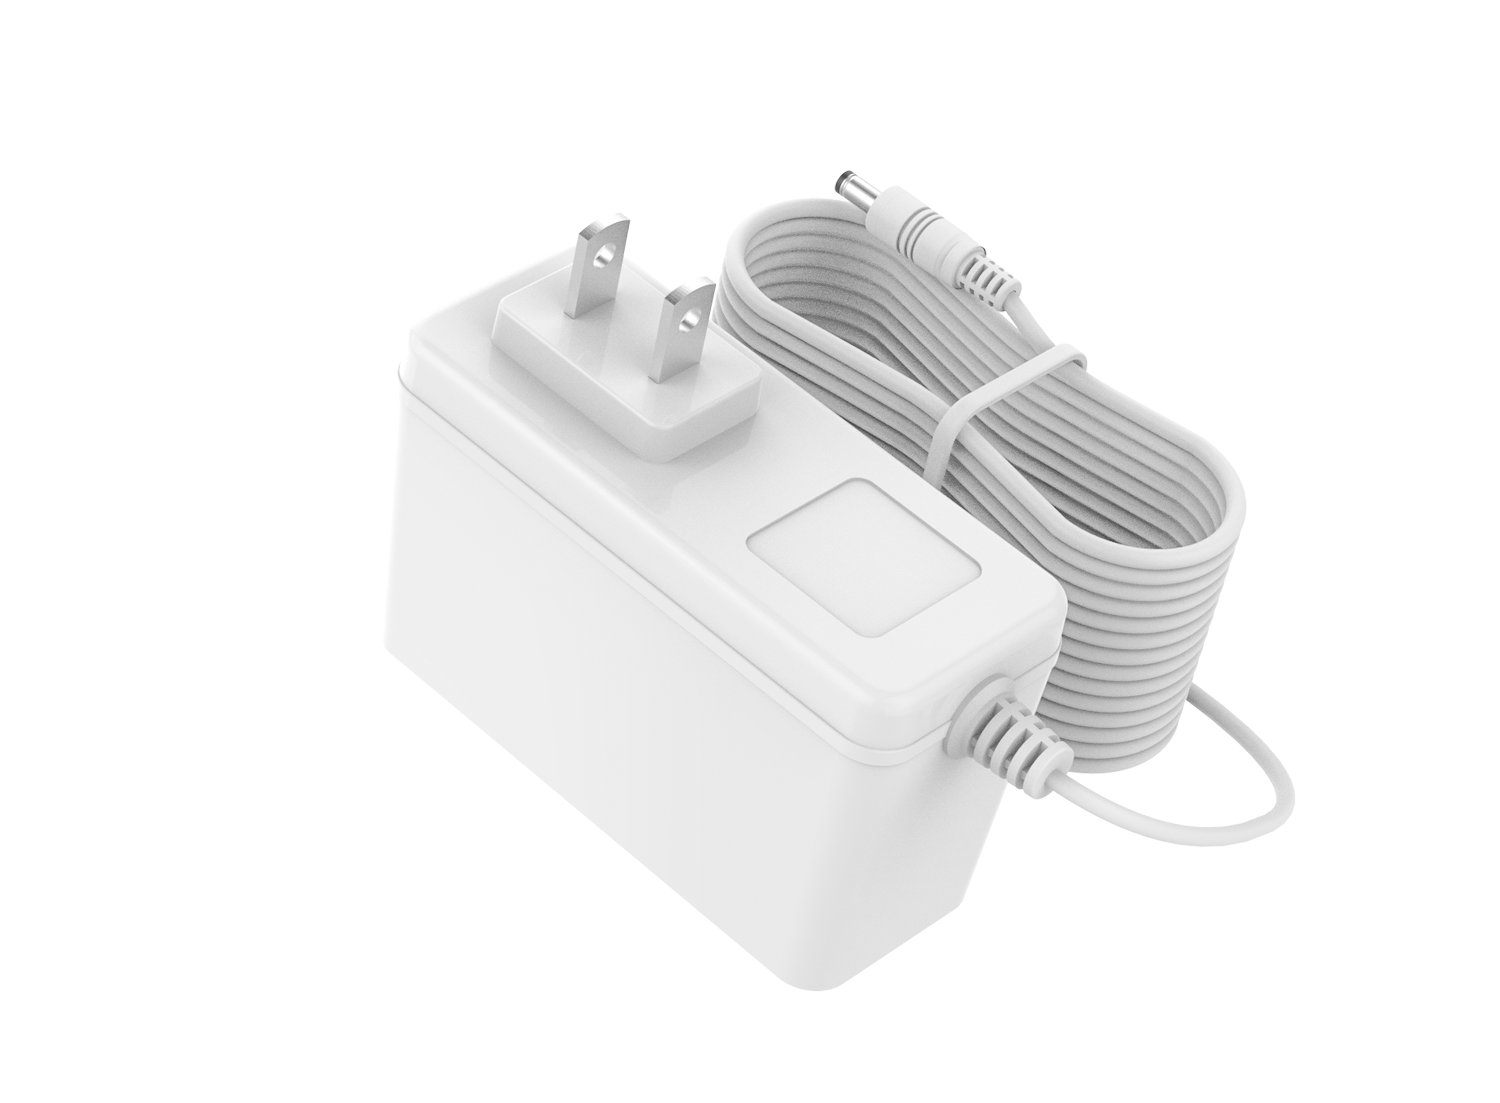 AC Adapter AD0301-C type WHITE US Standard